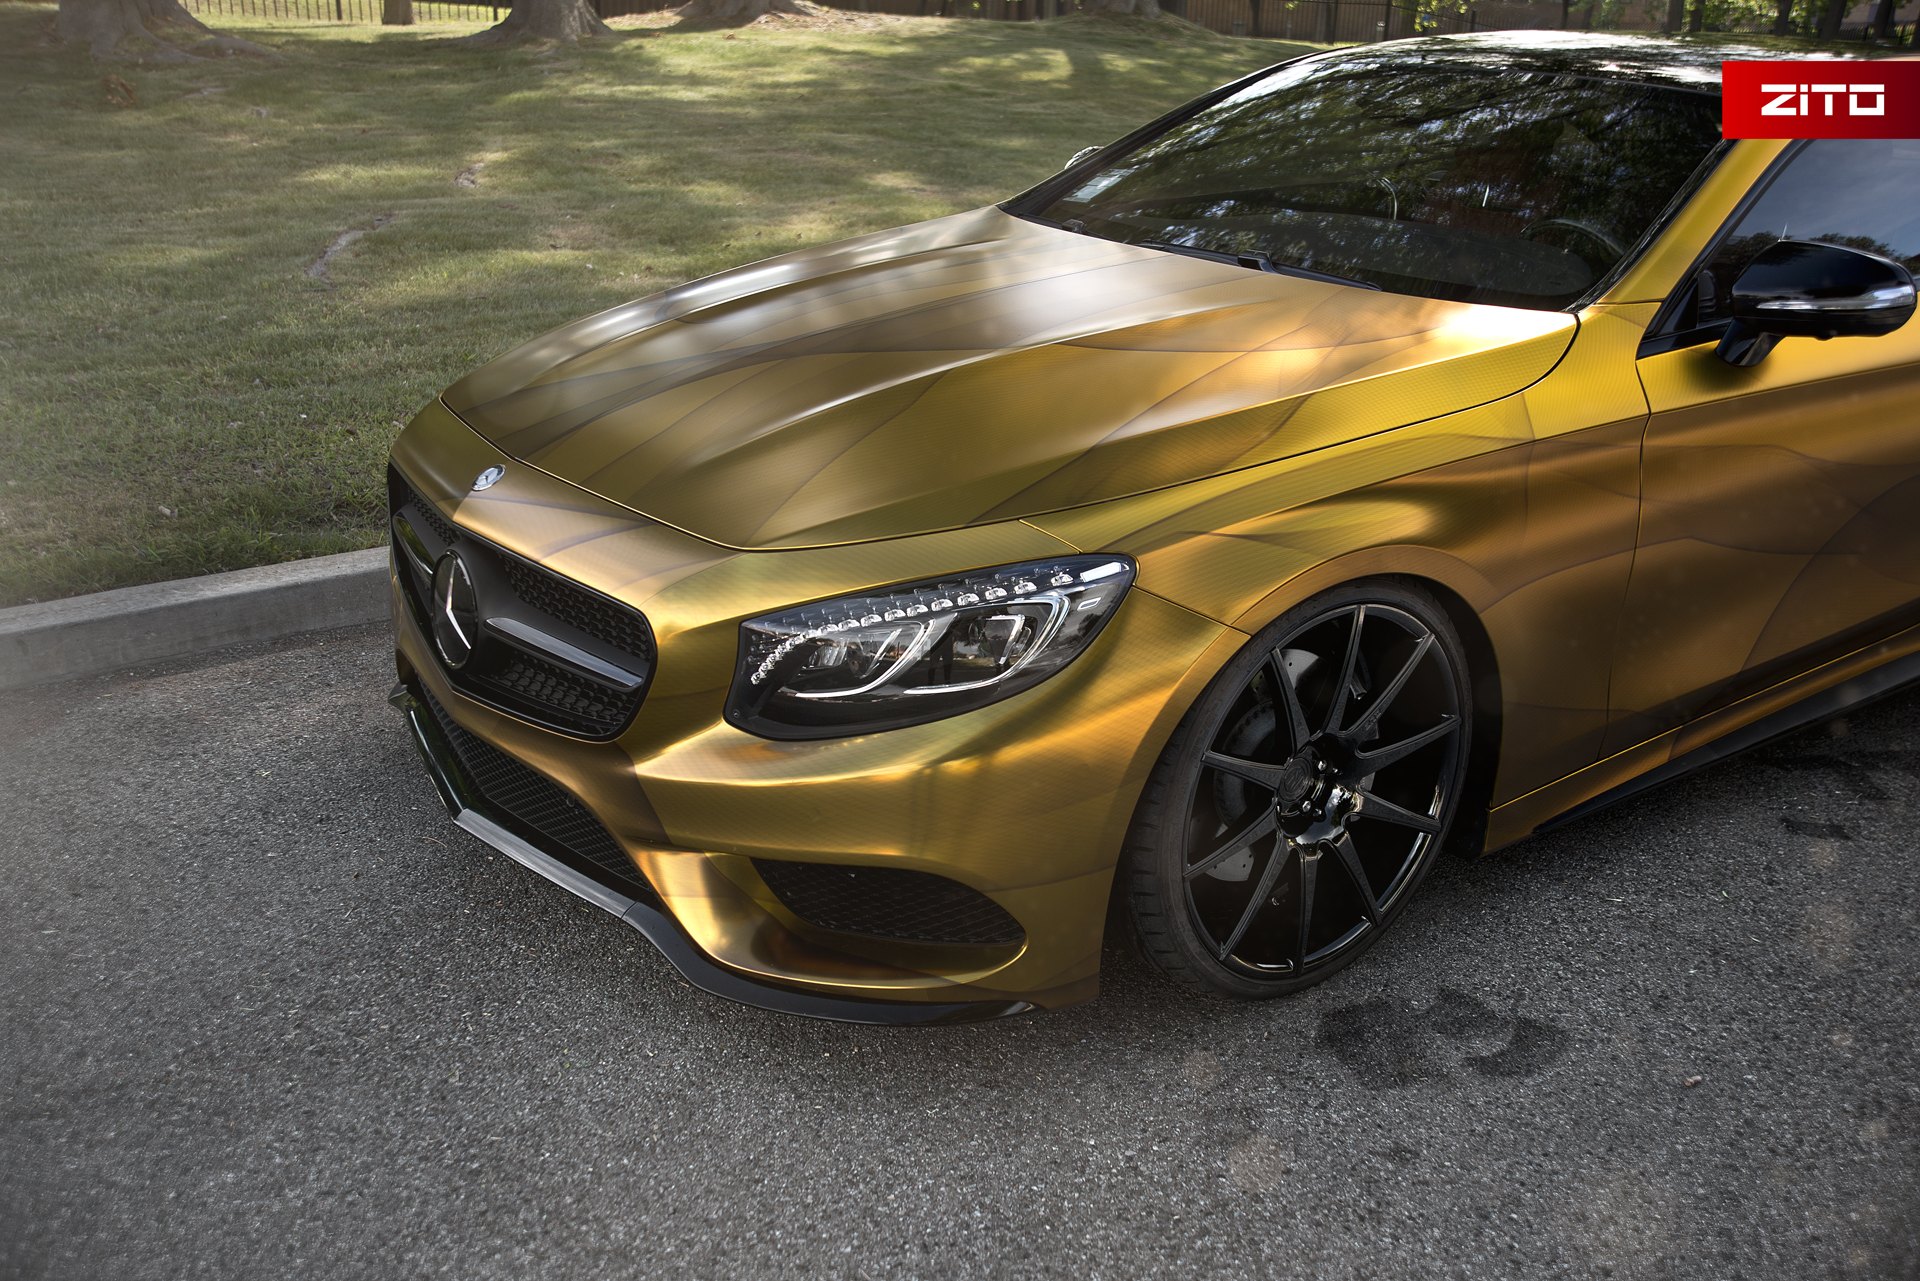 Aftermarket LED Headlights on Gold Wrapped Mercedes S Class - Photo by Zito Wheels